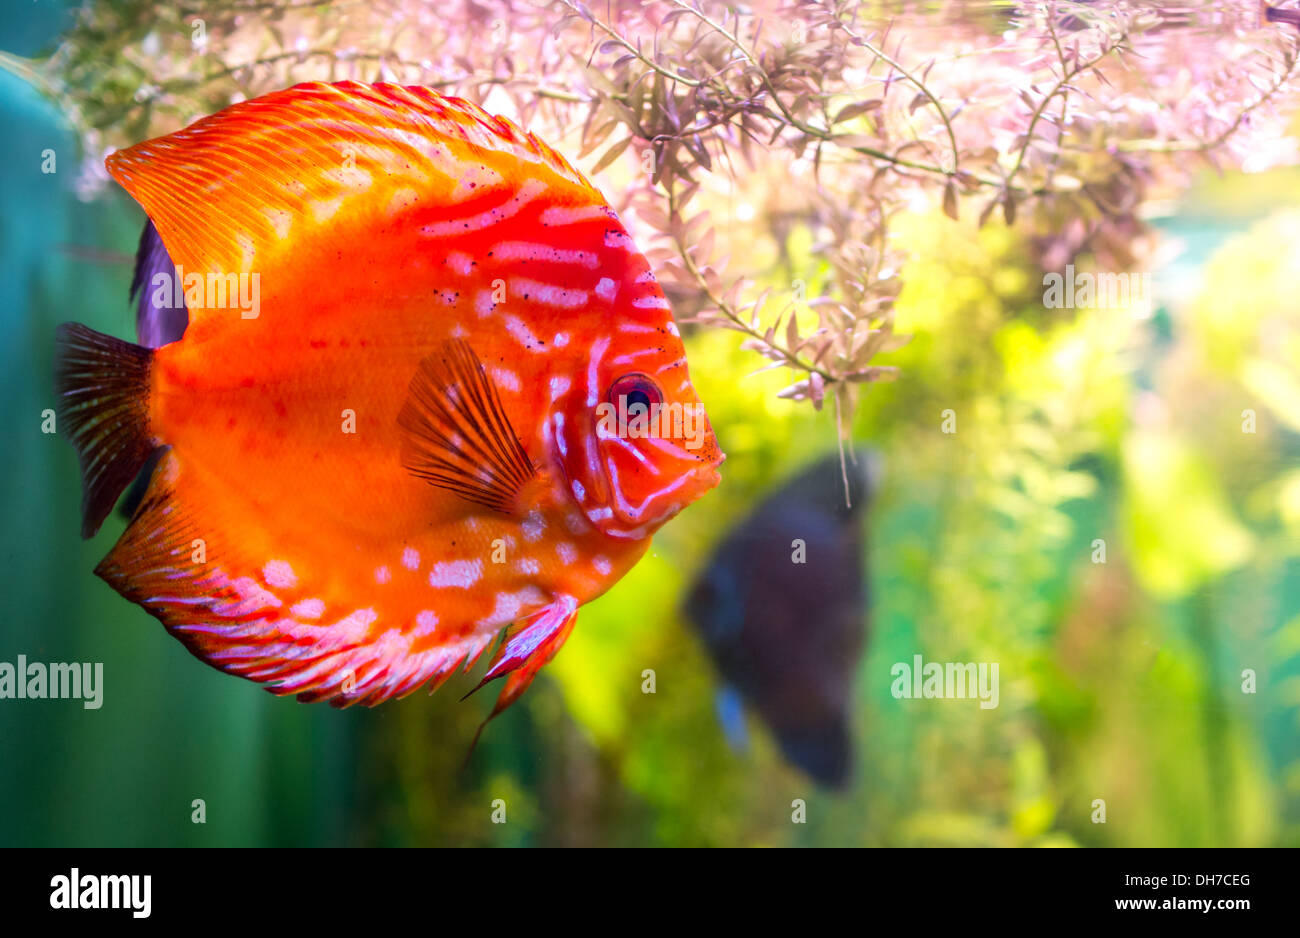 Symphysodon discus in an aquarium on a green background Stock Photo